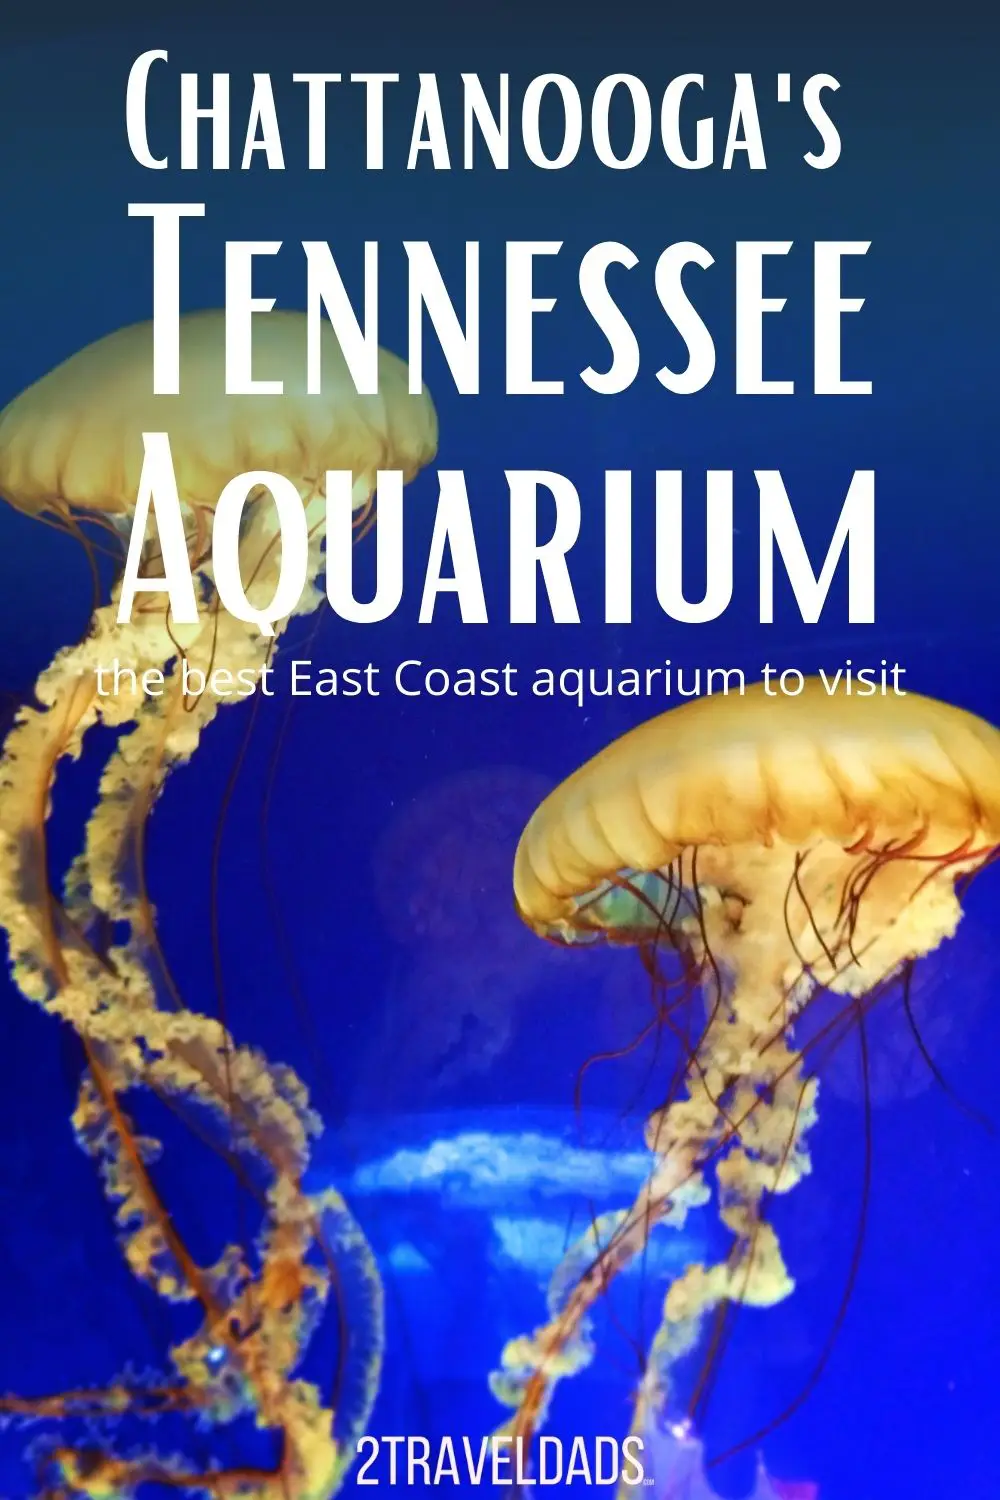 The Tennessee Aquarium in Chattanooga is the best zoo/aquarium on the East Coast. Tips for visiting with kids, special exhibits and more